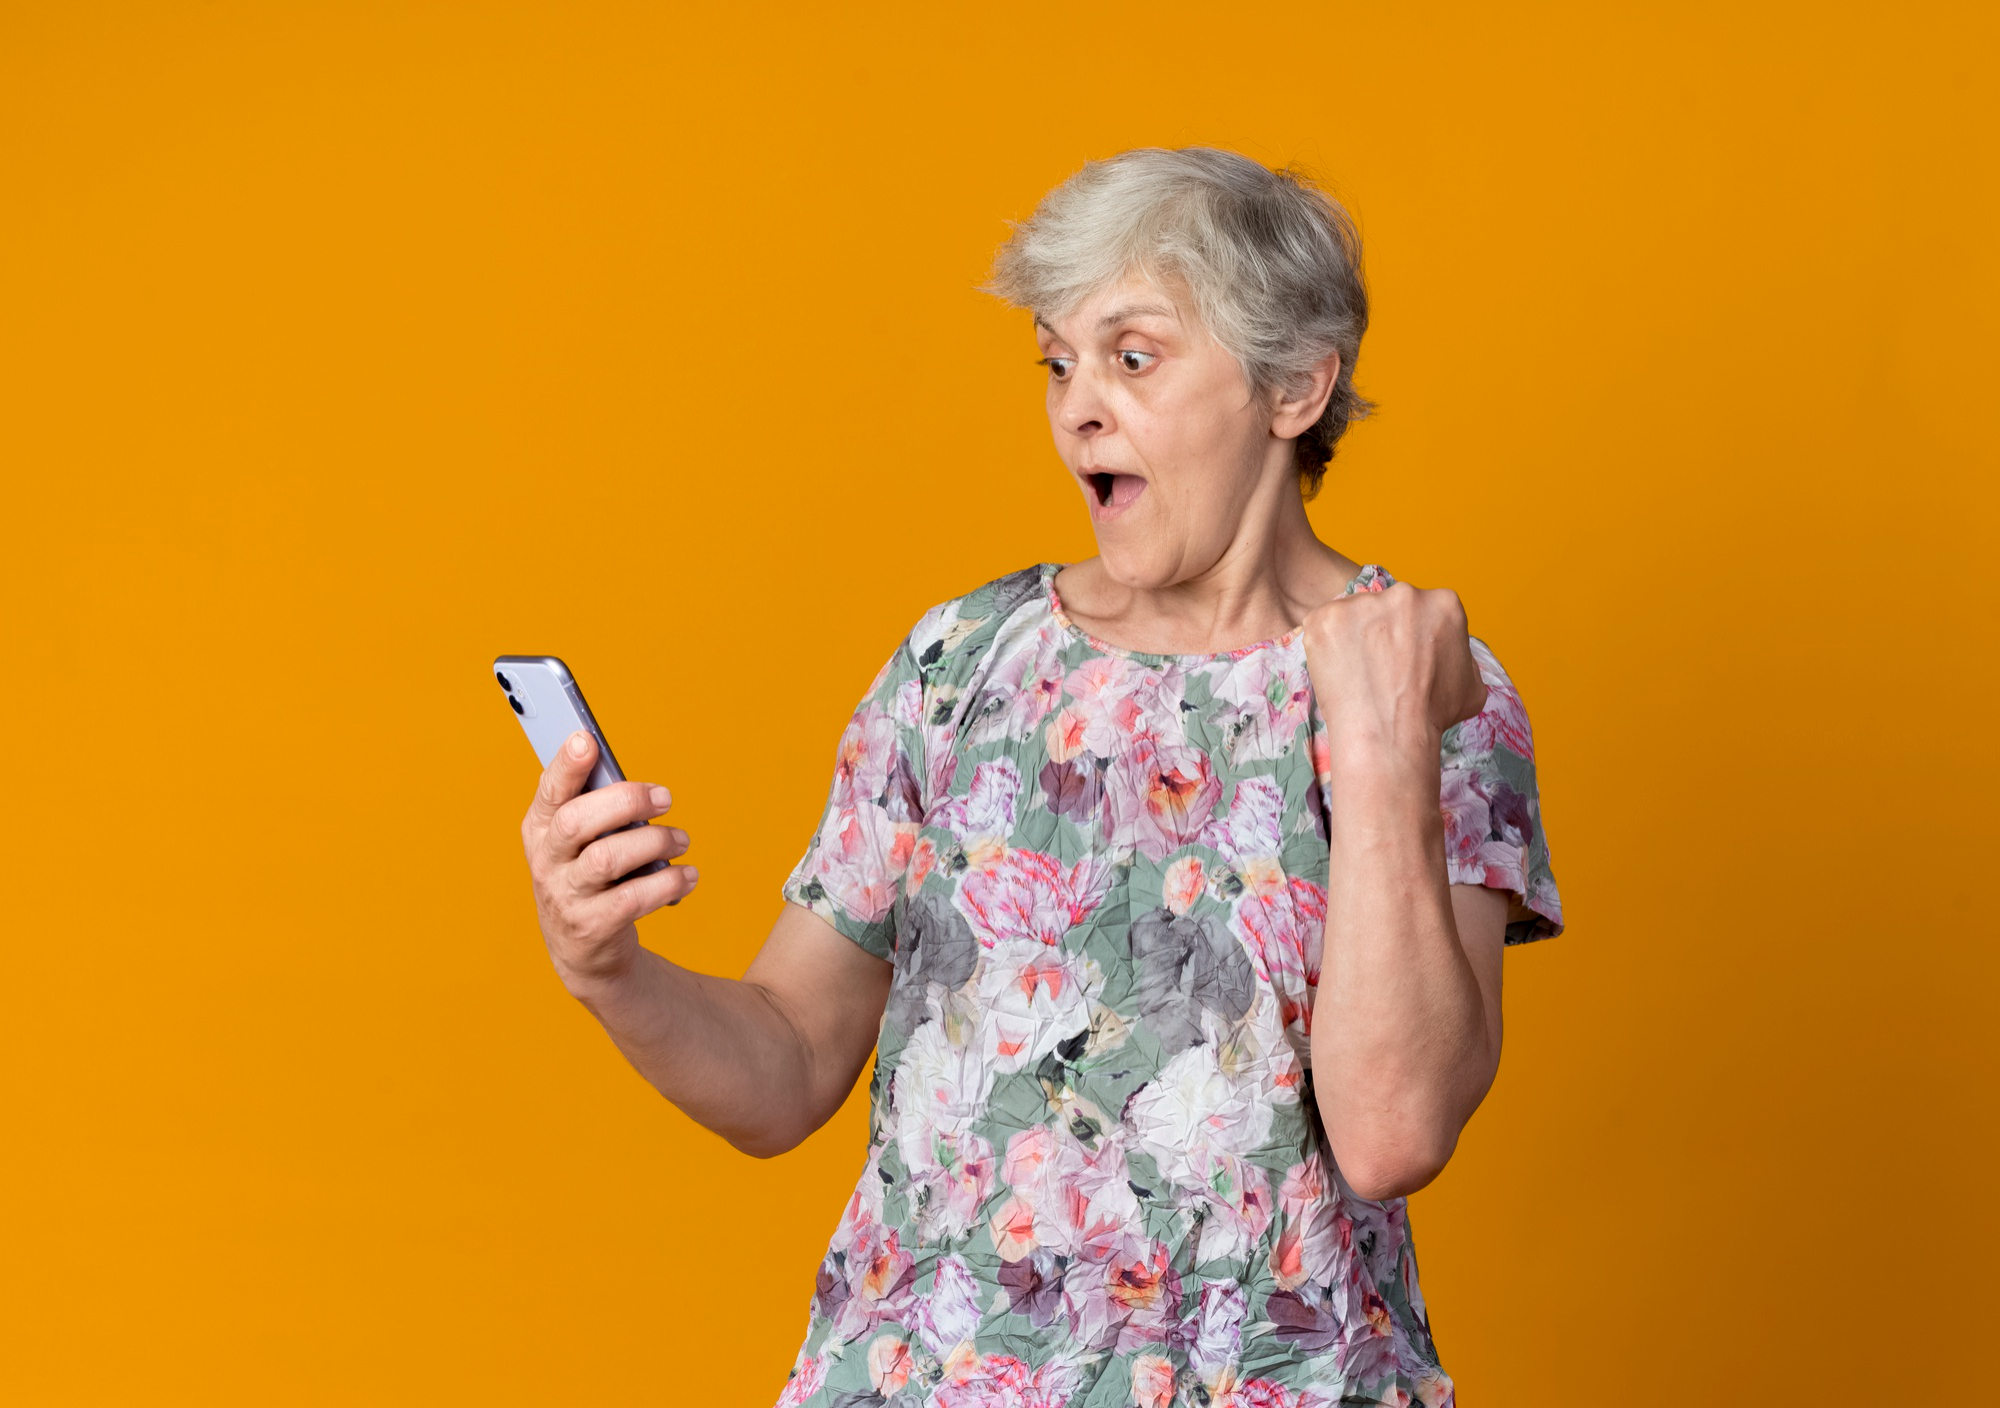 An older woman reacting in shock while looking at her phone | Source: Freepik